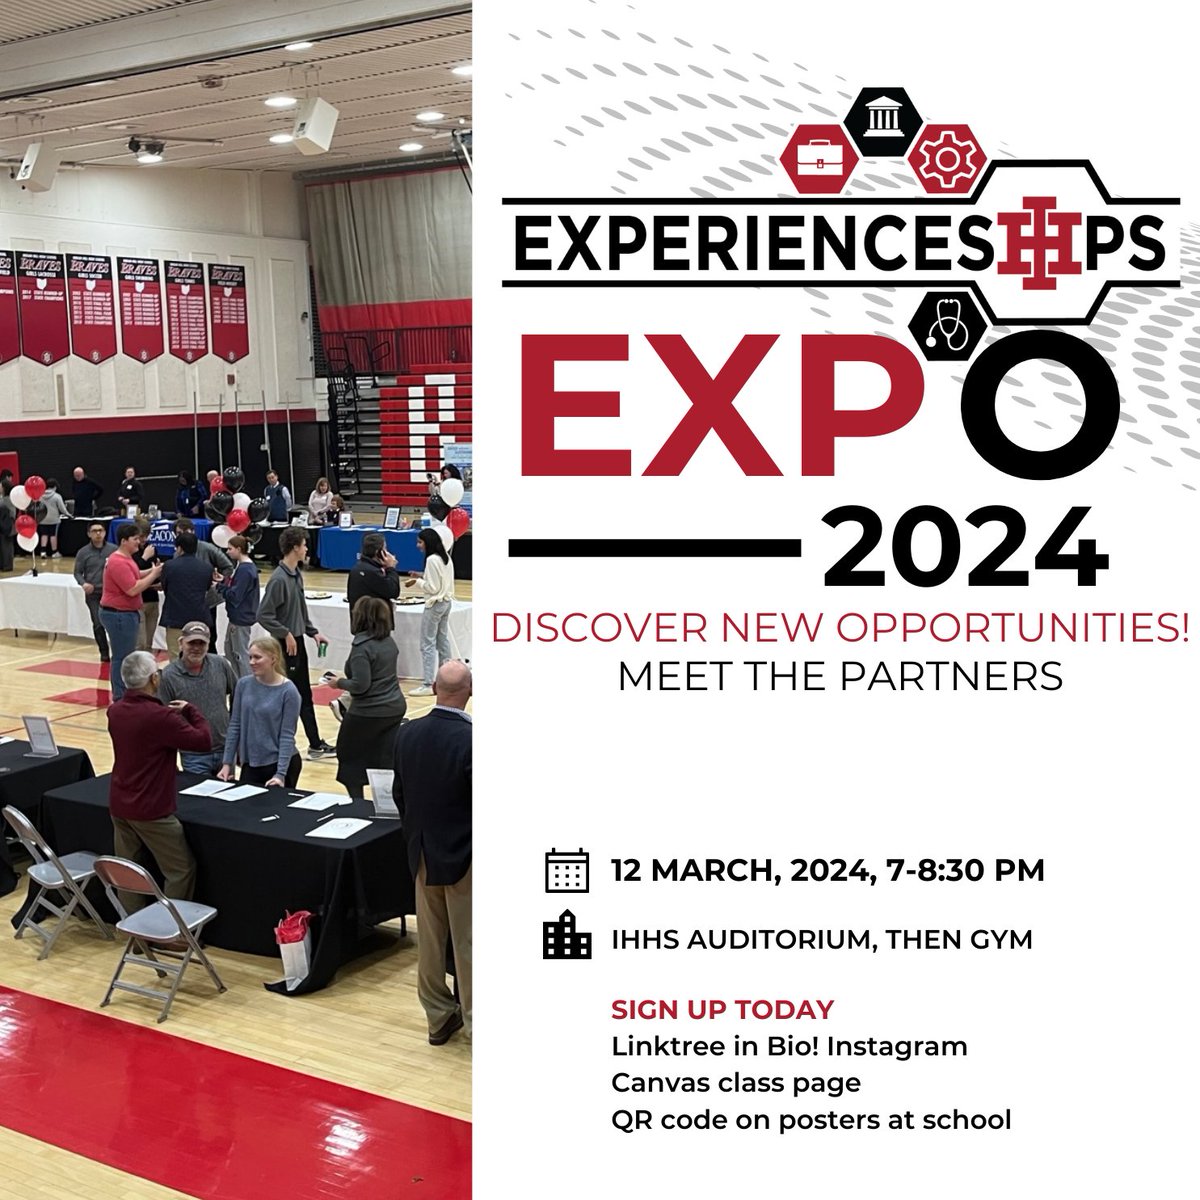 It is time to sign up for the biggest event of the year for Experienceships. @ihschools Partners will be there ready to show you their EXP opportunities and meet YOU, students. Parents are welcome to come and learn more about the program. 7pm on 03-12! #ihpromise #careerprep